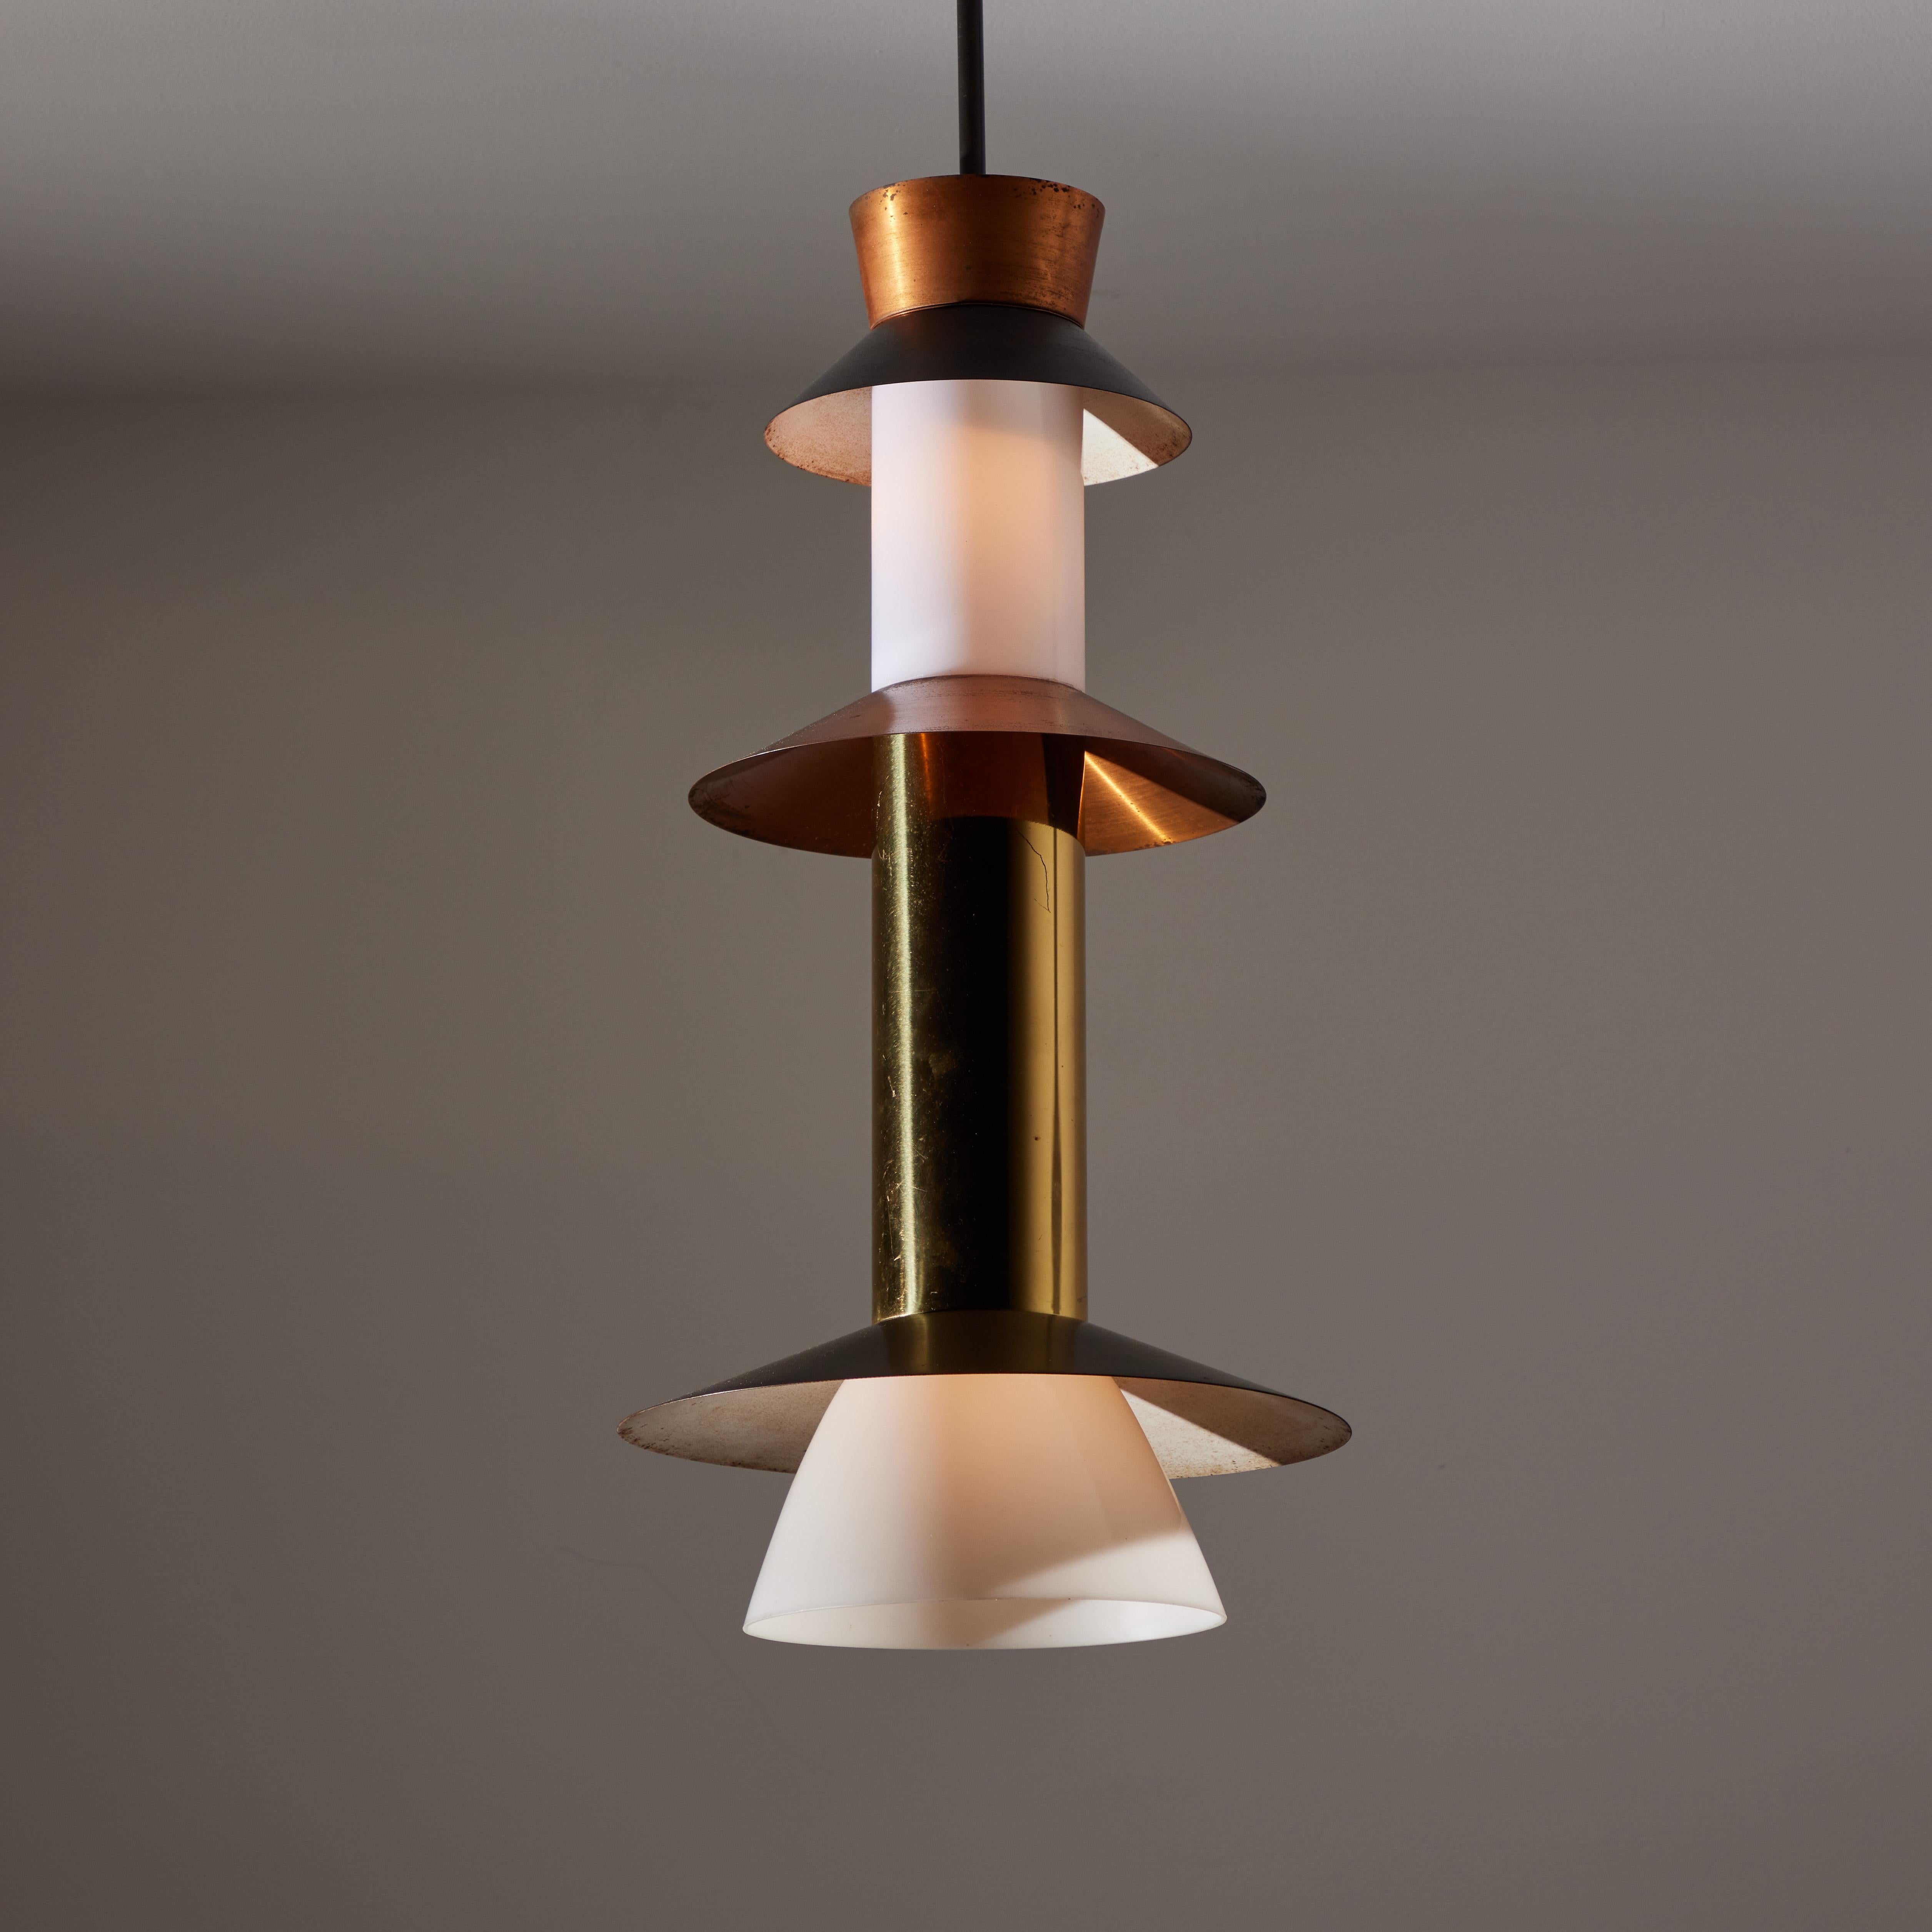 Ceiling light in the style of Stilnovo. Manufactured in Italy, circa 1950's. Copper, brushed stain glass, painted metal. Original canopy. Rewired for U.S. standards. We recommend one E27 60w maximum bulb. Bulbs provided as a one time courtesy.